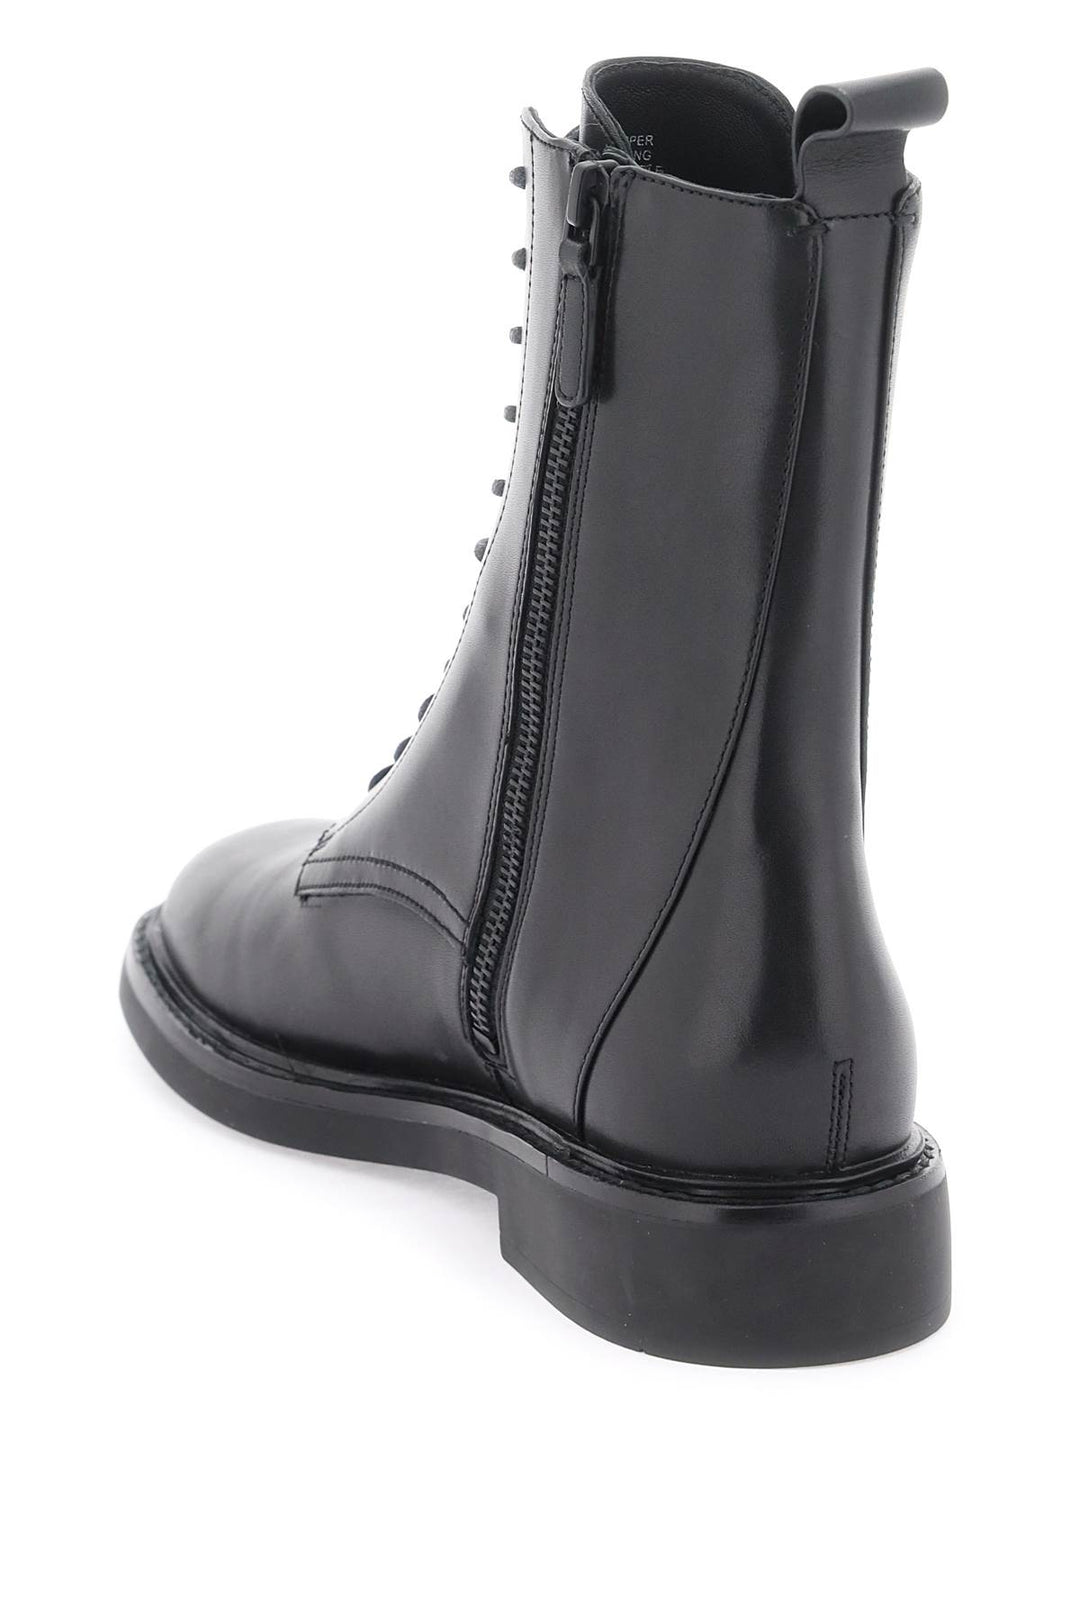 Tory Burch Double T Combat Boots   Nero